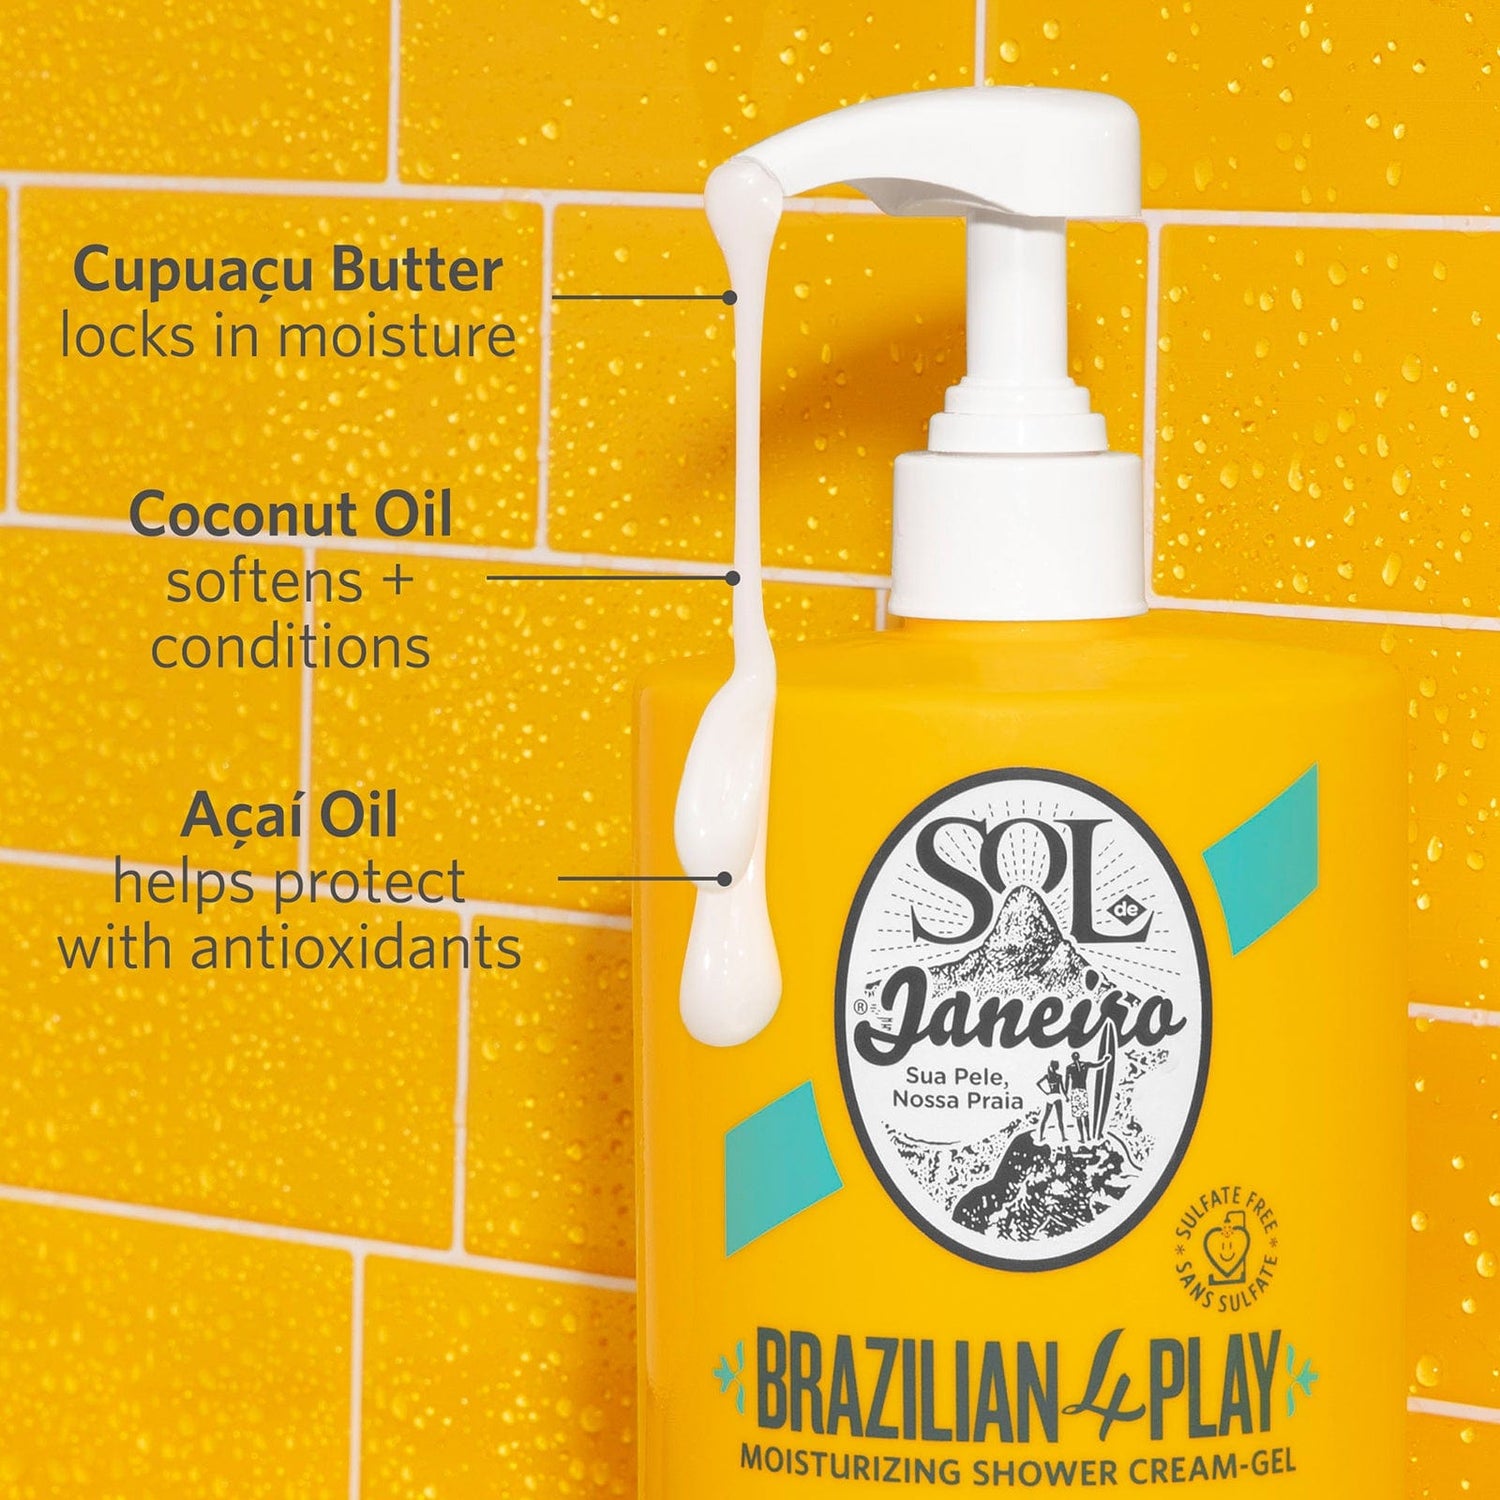 Cupuacu Butter locks in moisture. Coconut oil softens and conditions. Acai oil helps protect with antioxidents | Brazilian 4 Play Moisturizing Shower Cream-Gel 1 liter | Sol de janeiro